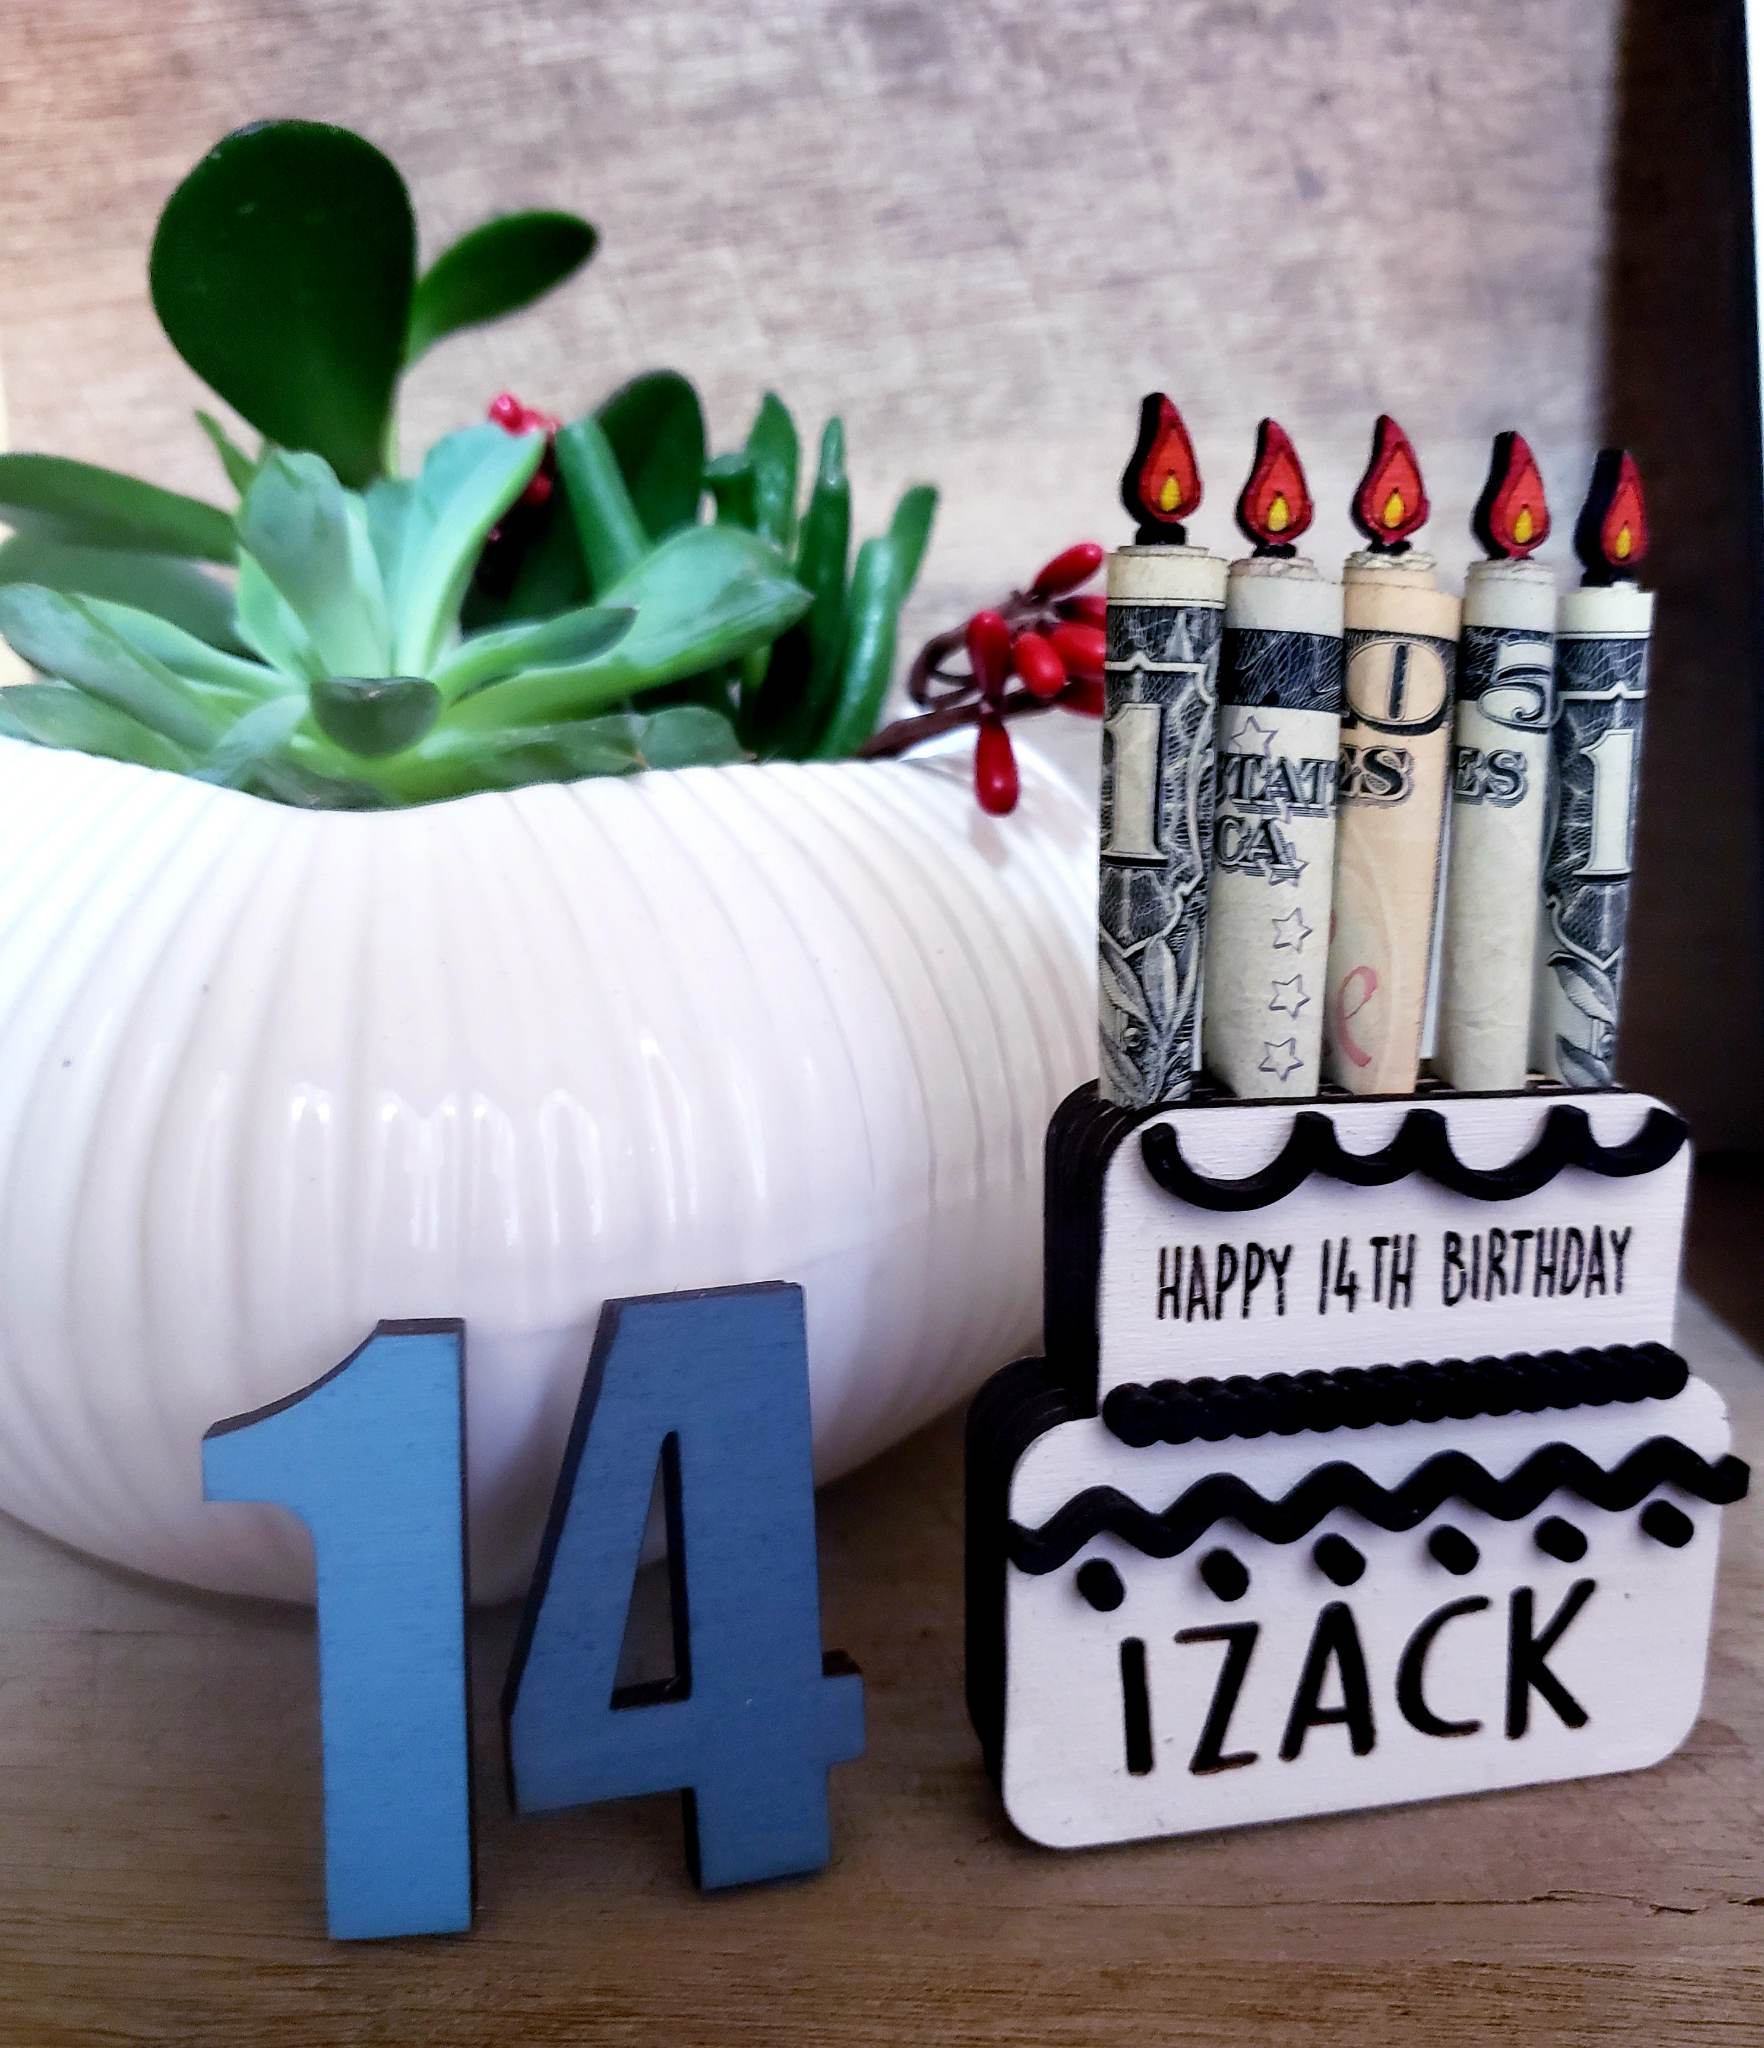 This hand painted Birthday Cake Money Holder is an ideal way to make someone's special day even more memorable. Crafted from laser cut birch wood, this decorative holder measures approx. 3.25 x 3" and comes in your choice of colors. Give the perfect gift with this unique celebration item.